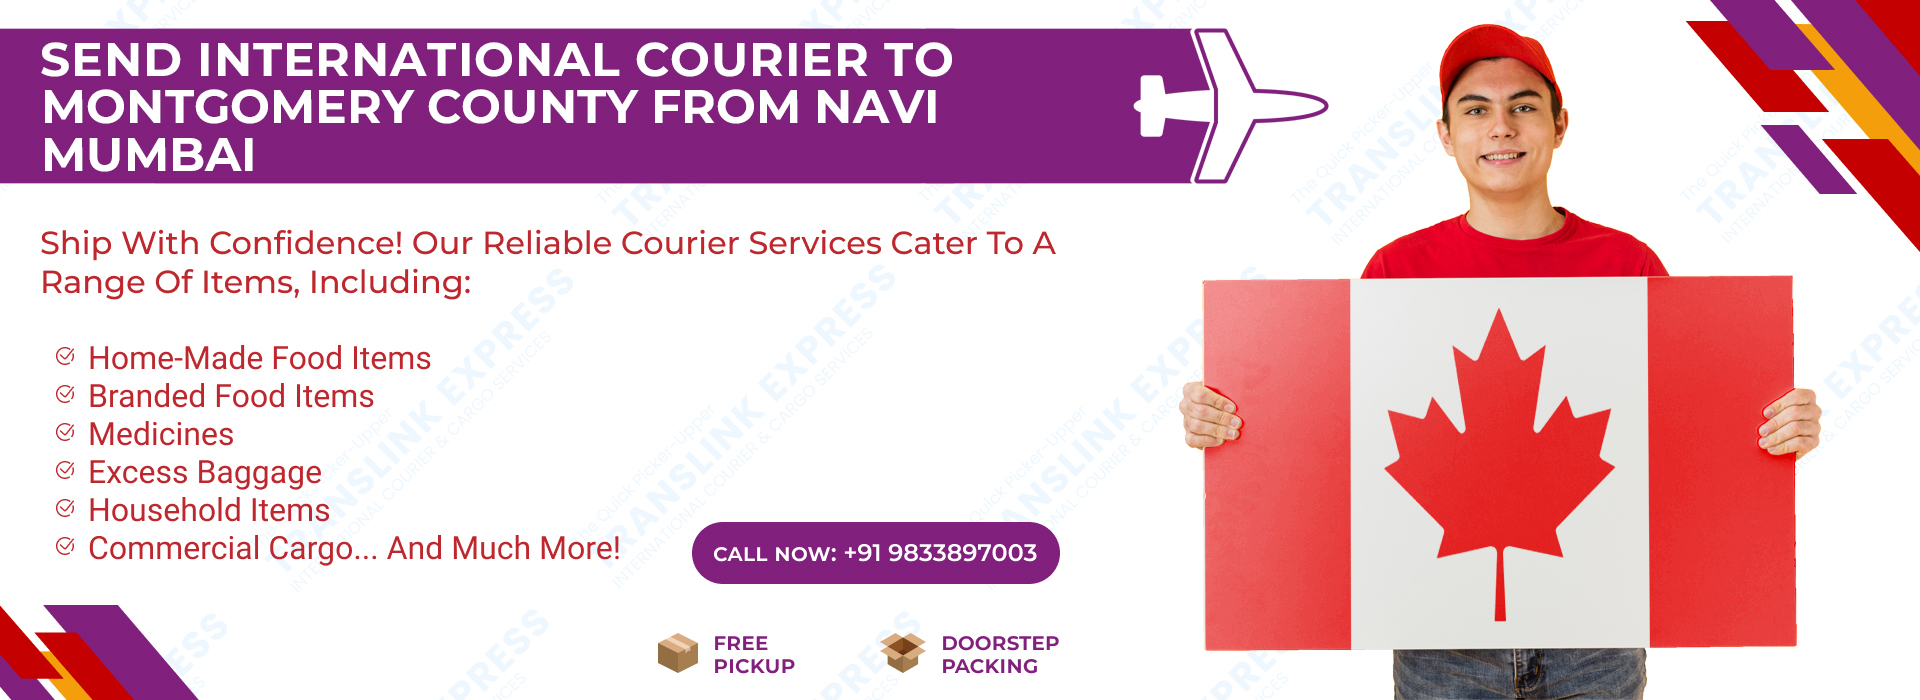 Courier to Montgomery County From Navi Mumbai